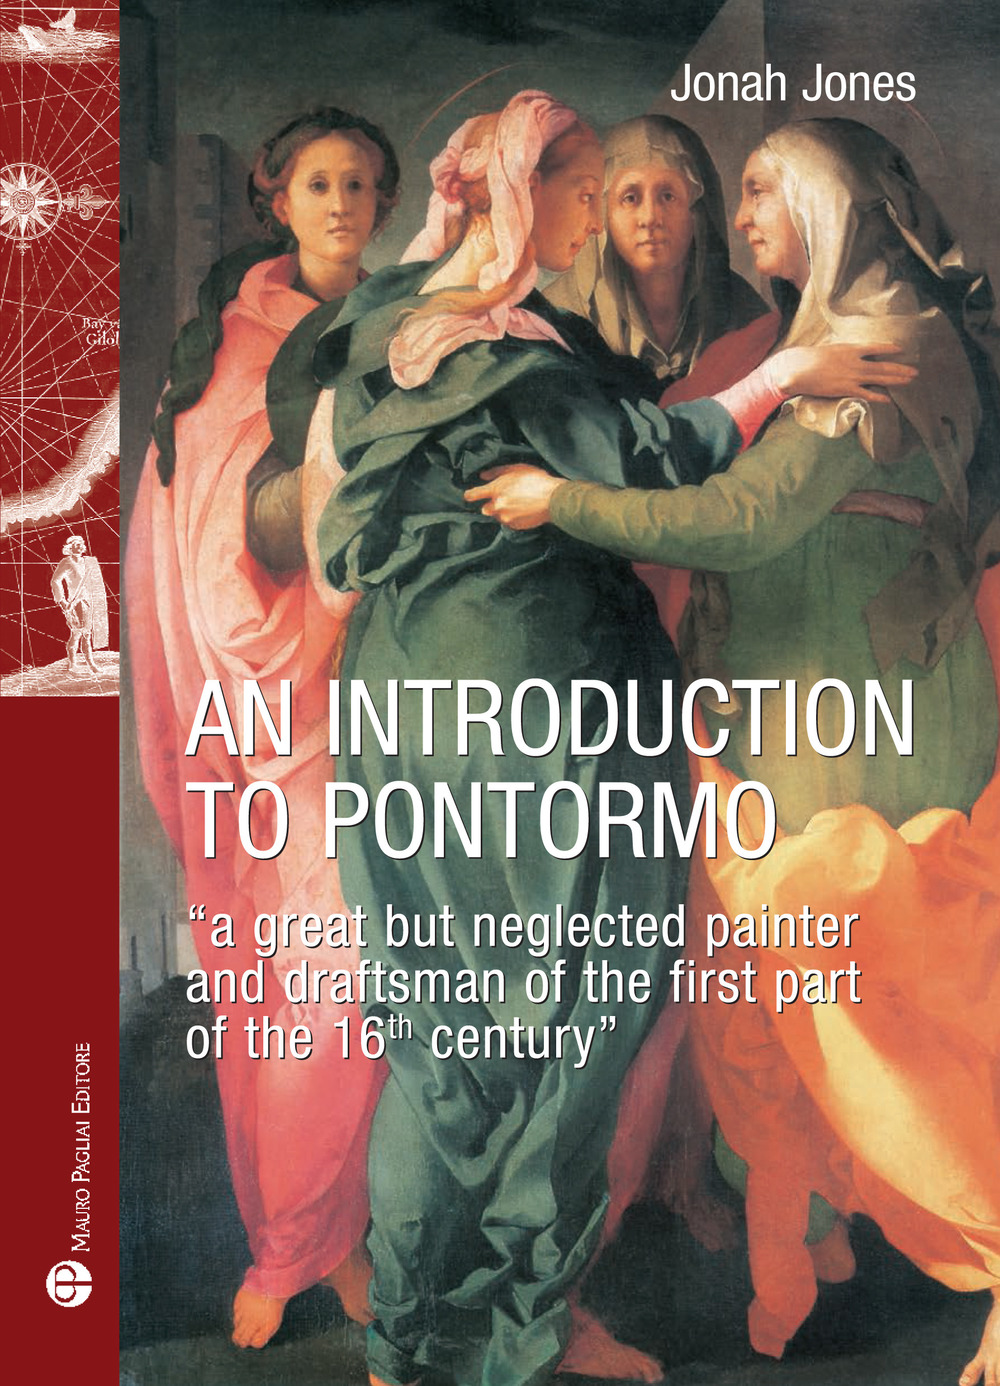 An introduction to Pontormo. A great but neglected painter and draftsman of the first part of the 16th century